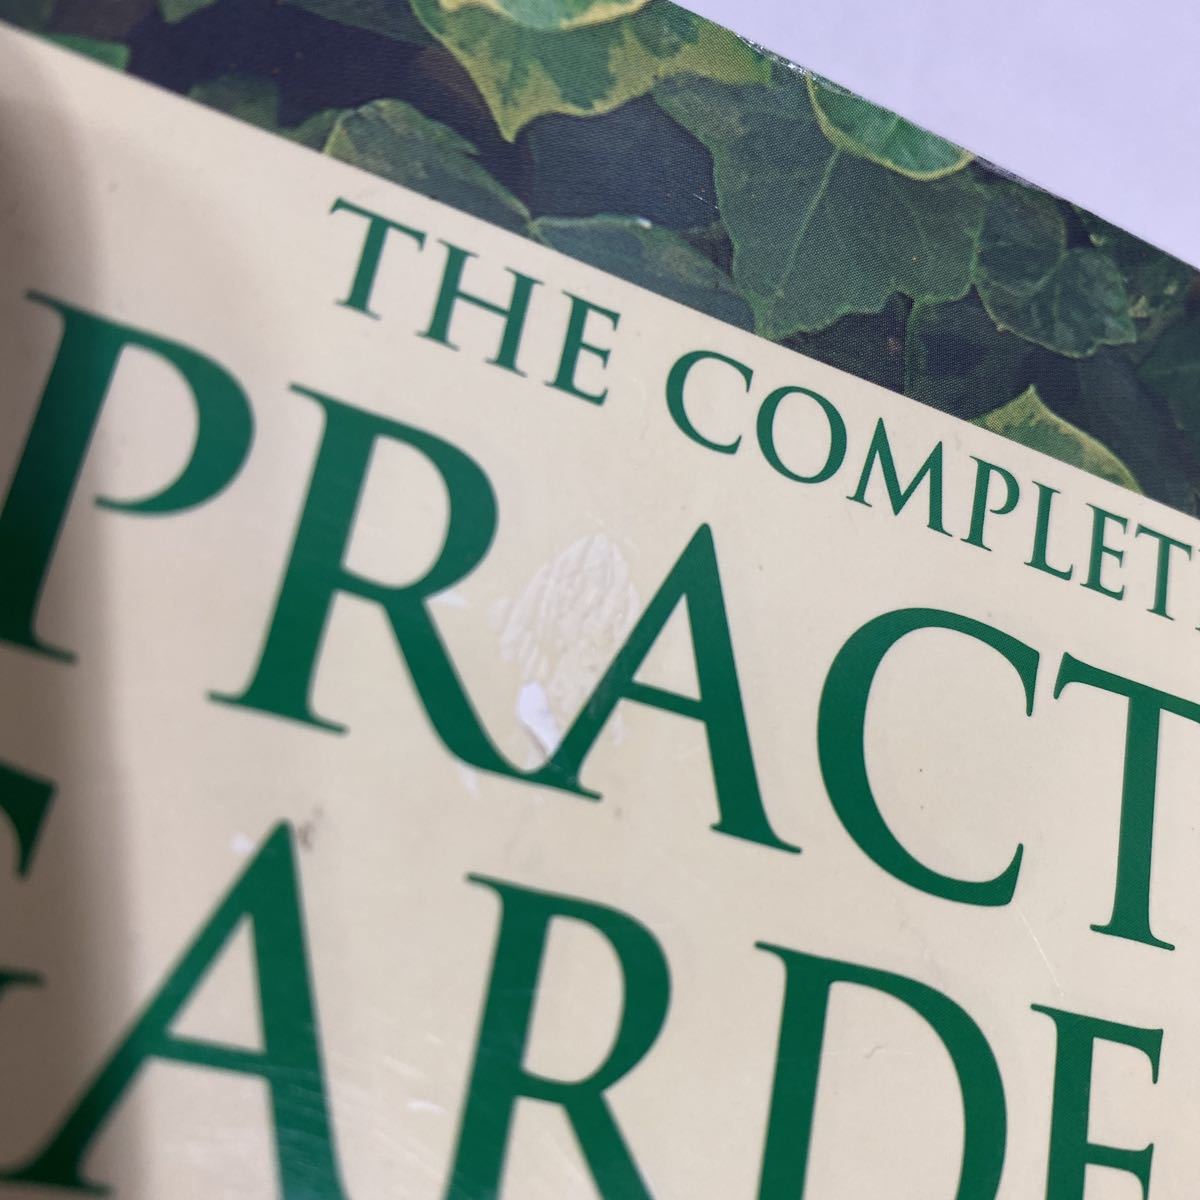 THE COMPLETE BOOK OF PRACTICAL GARDENING 古本　表紙破れあり　洋書　日本語表記無し　園芸　ガーデニング_画像2